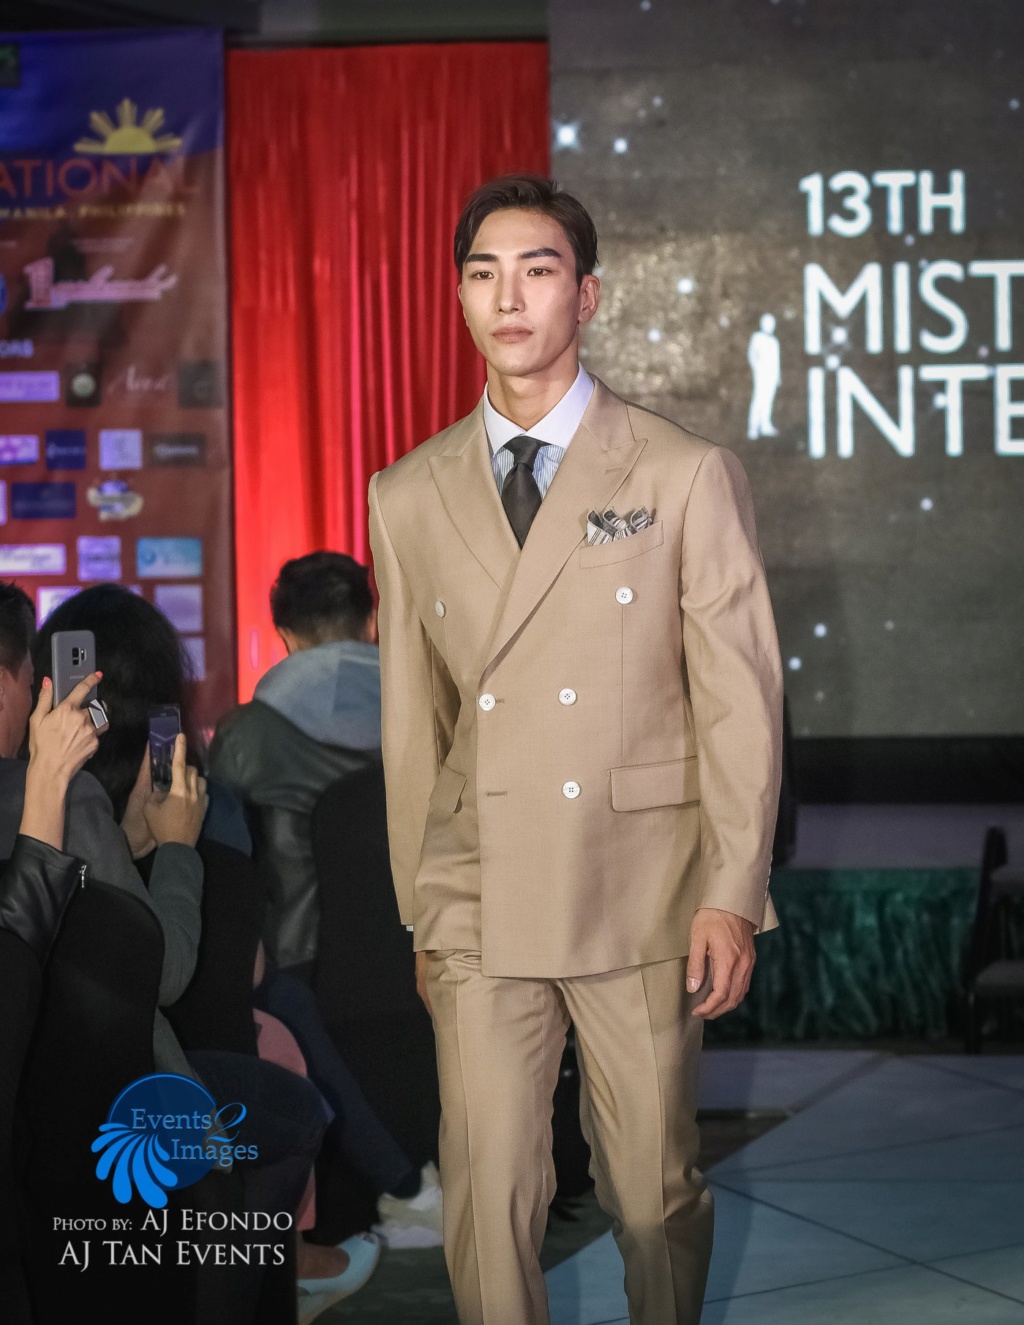 The 13th Mister International in Manila, Philippines on February 24,2019 - Page 10 51996410